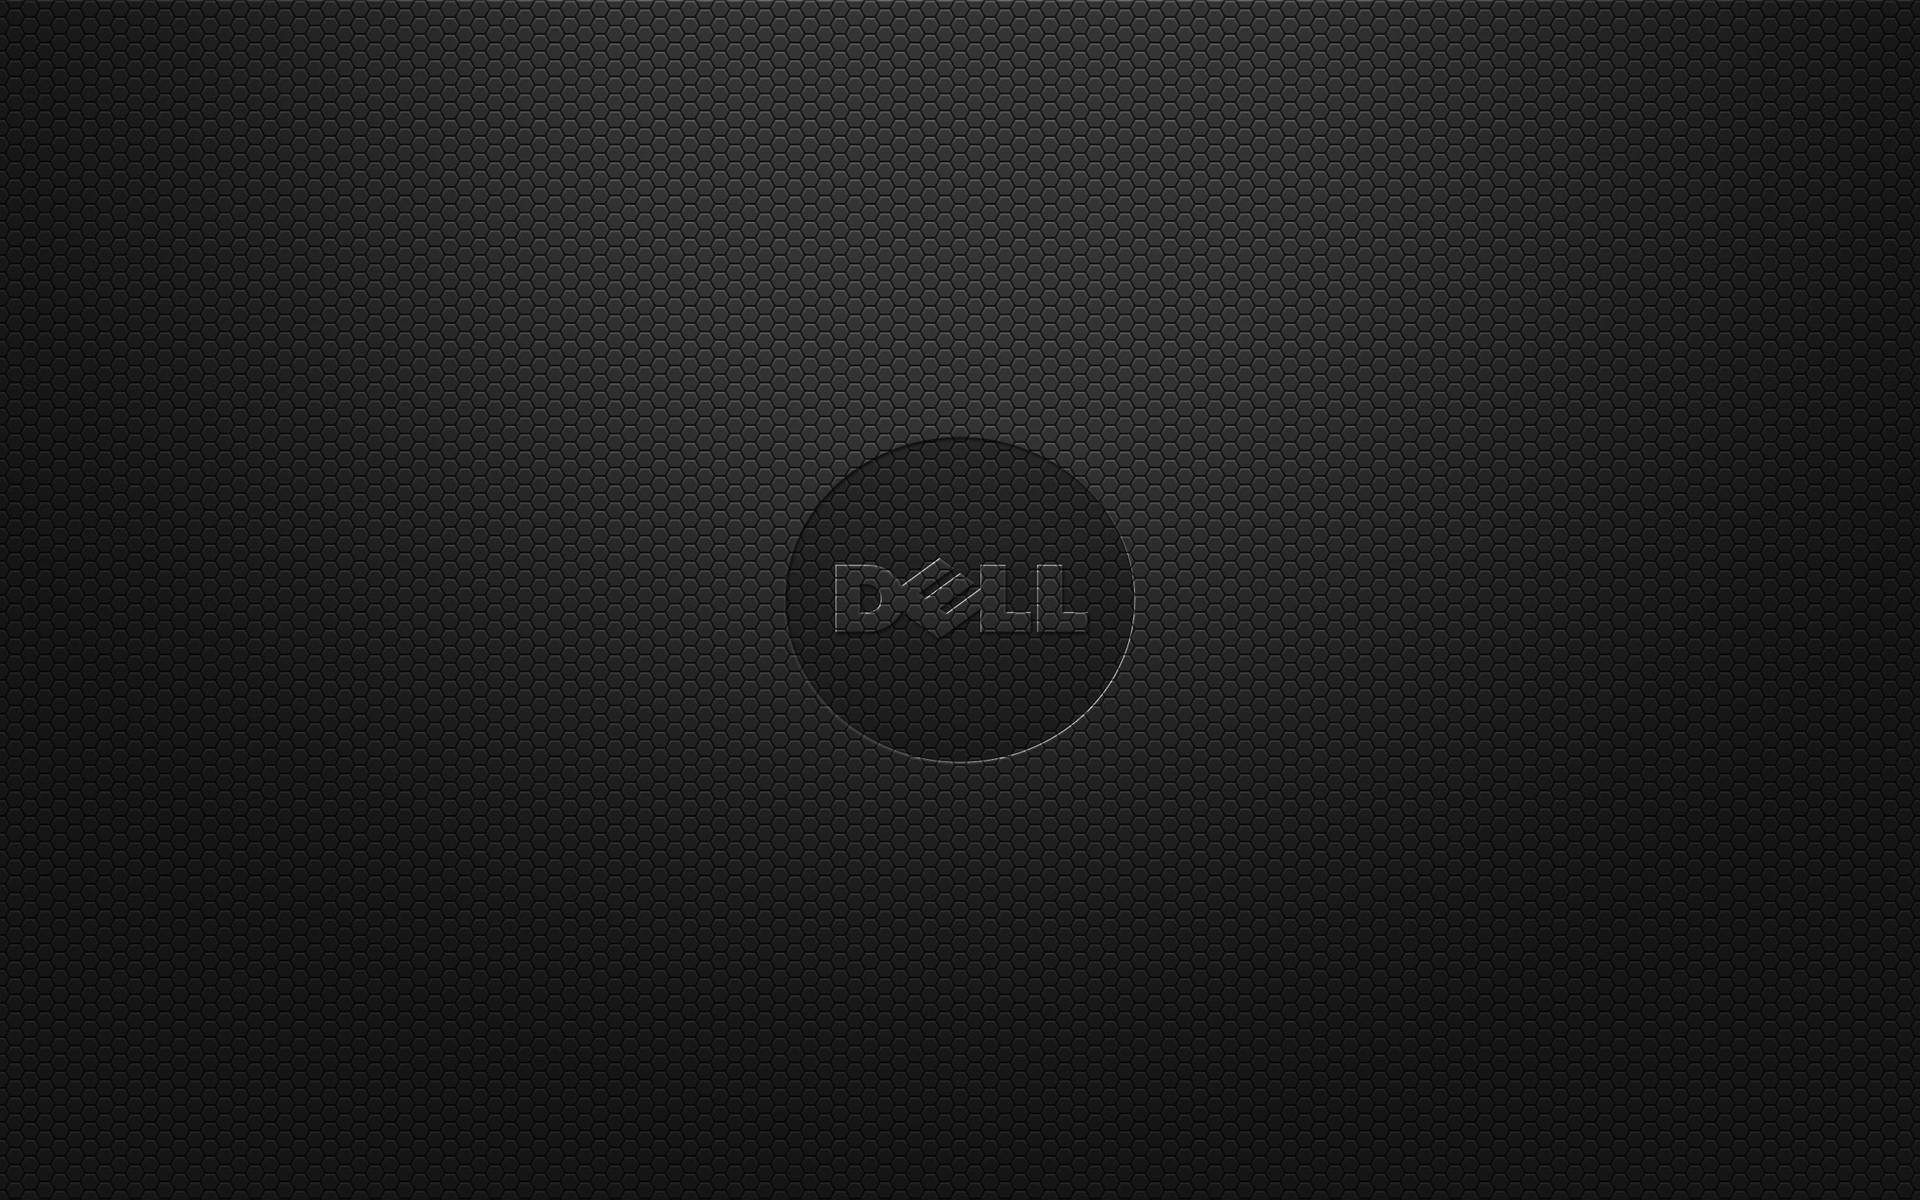 Honeycomb Textured Dell Laptop Background